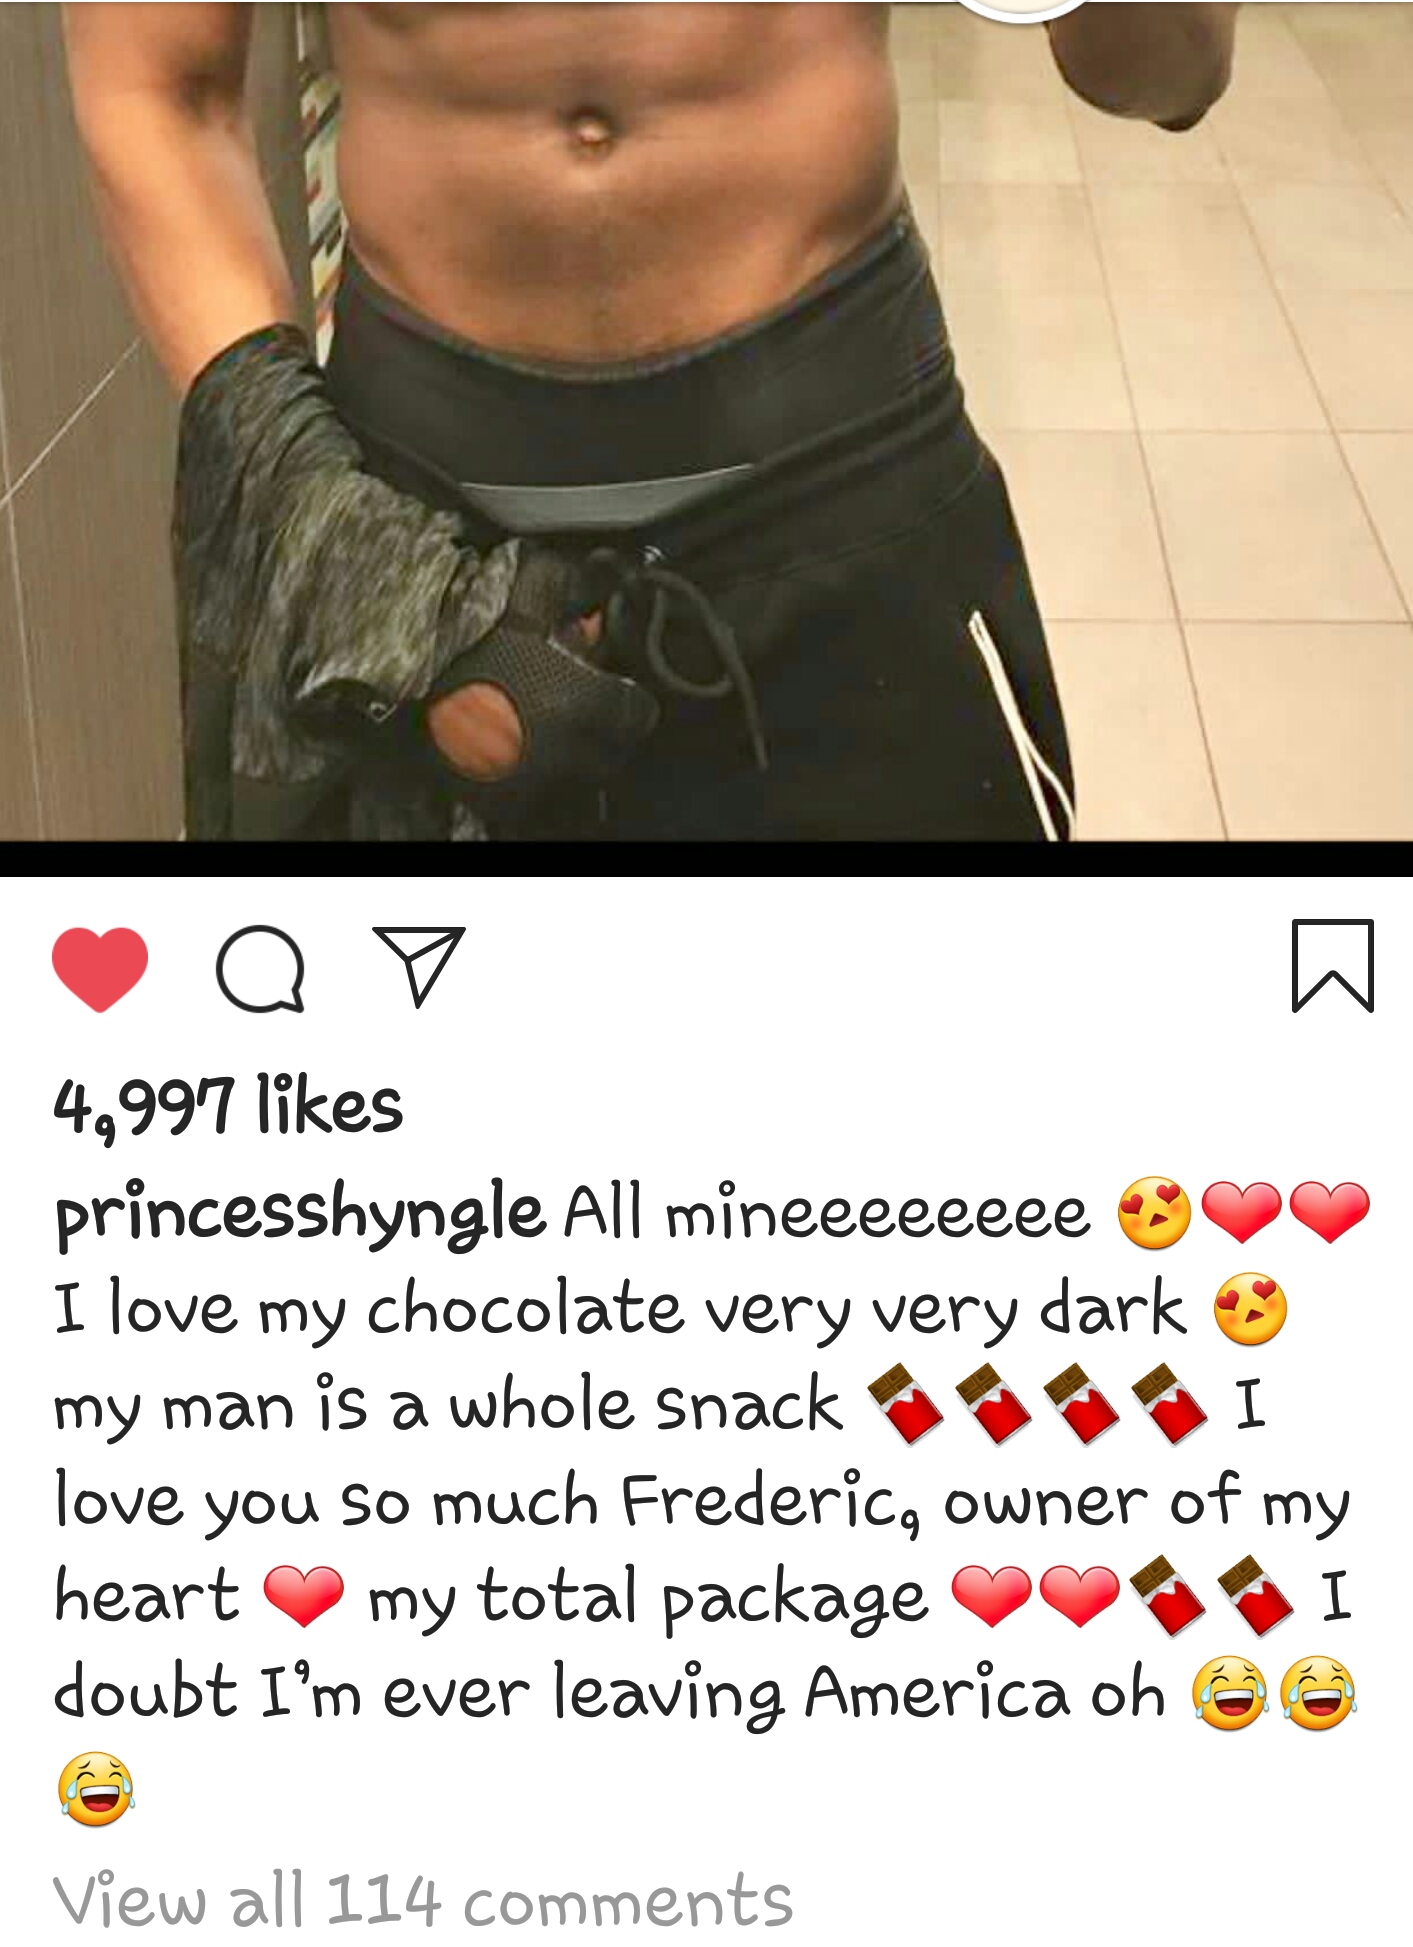  All mineeeeeeee I love my chocolate very very dark my man is a whole snack I love you so much Frederic, owner of my heart my total package I doubt I’m ever leaving America oh.